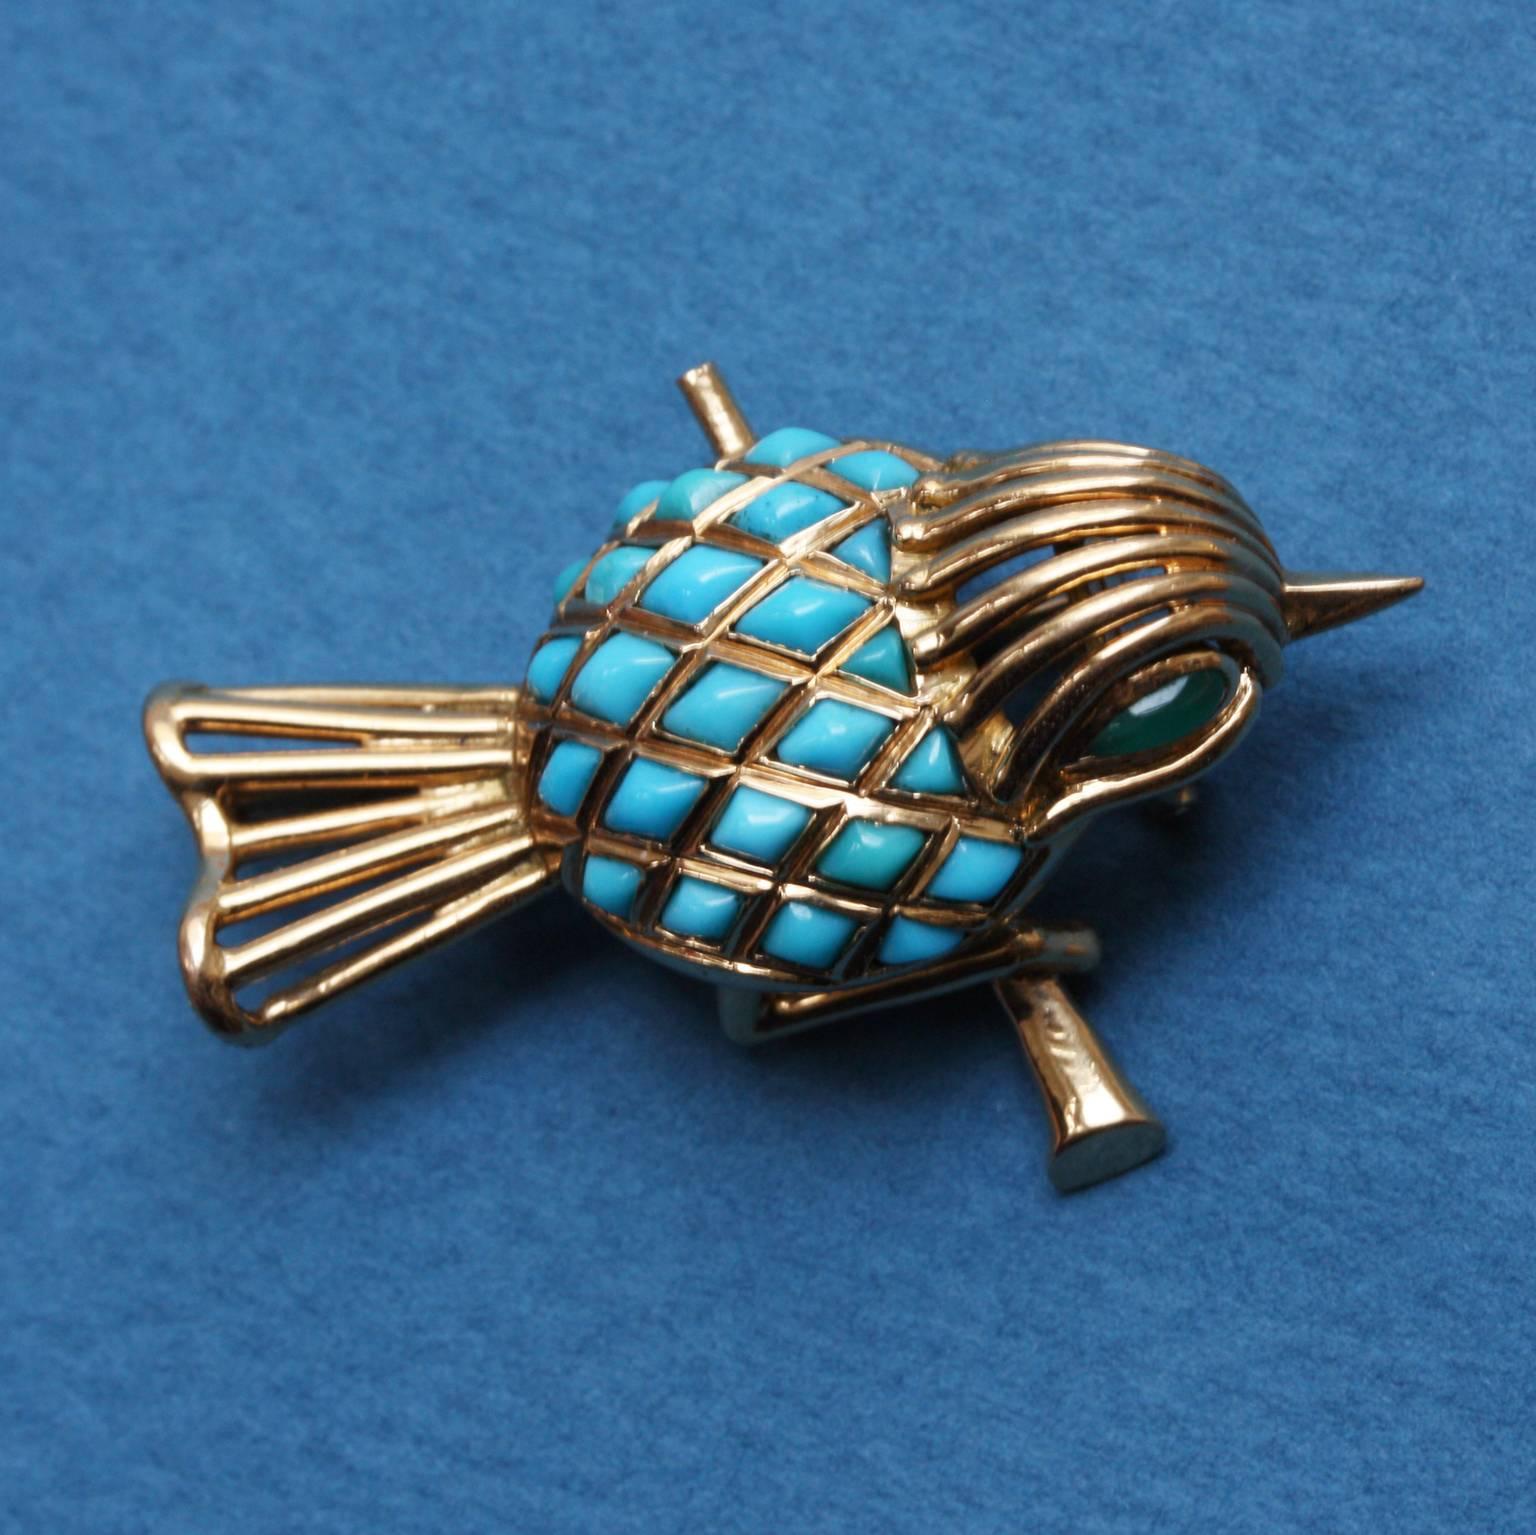 An 18 carat gold brooch in the shape of a bird with a turquoise body and a green agate eye, signed an numbered: Mauboussin, Paris, 3066, circa 1965.

weight: 9.2 grams
dimensions: 3.7 x 2.7 cm.